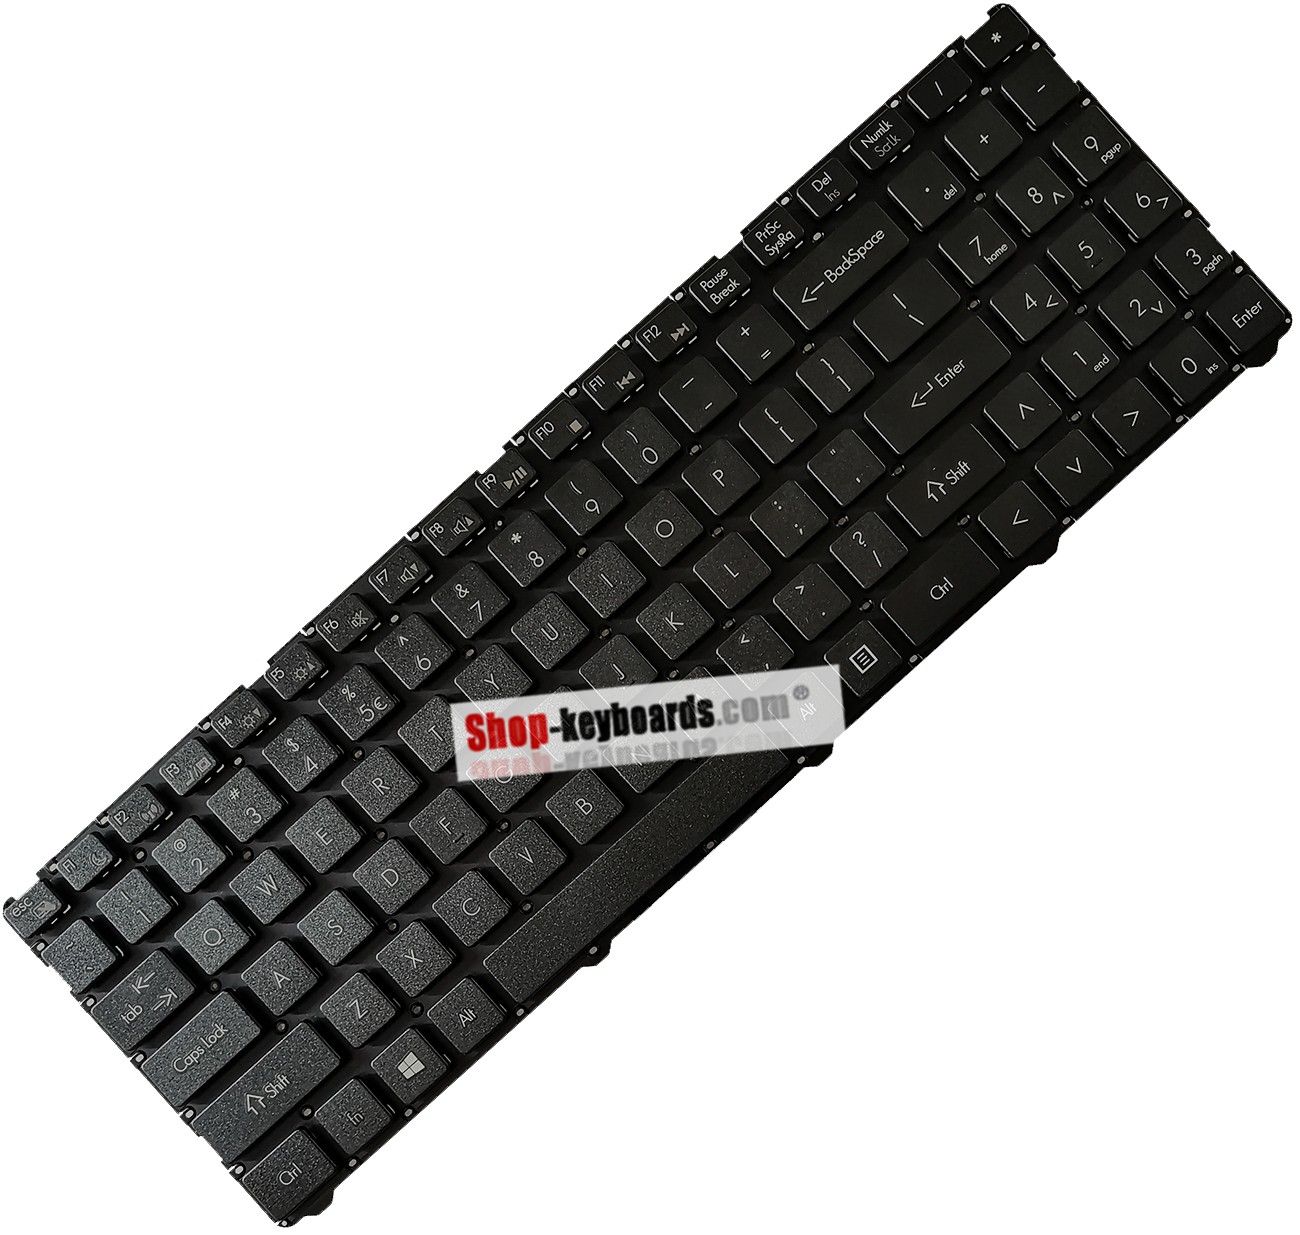 LG 15UD470-KX55K Keyboard replacement